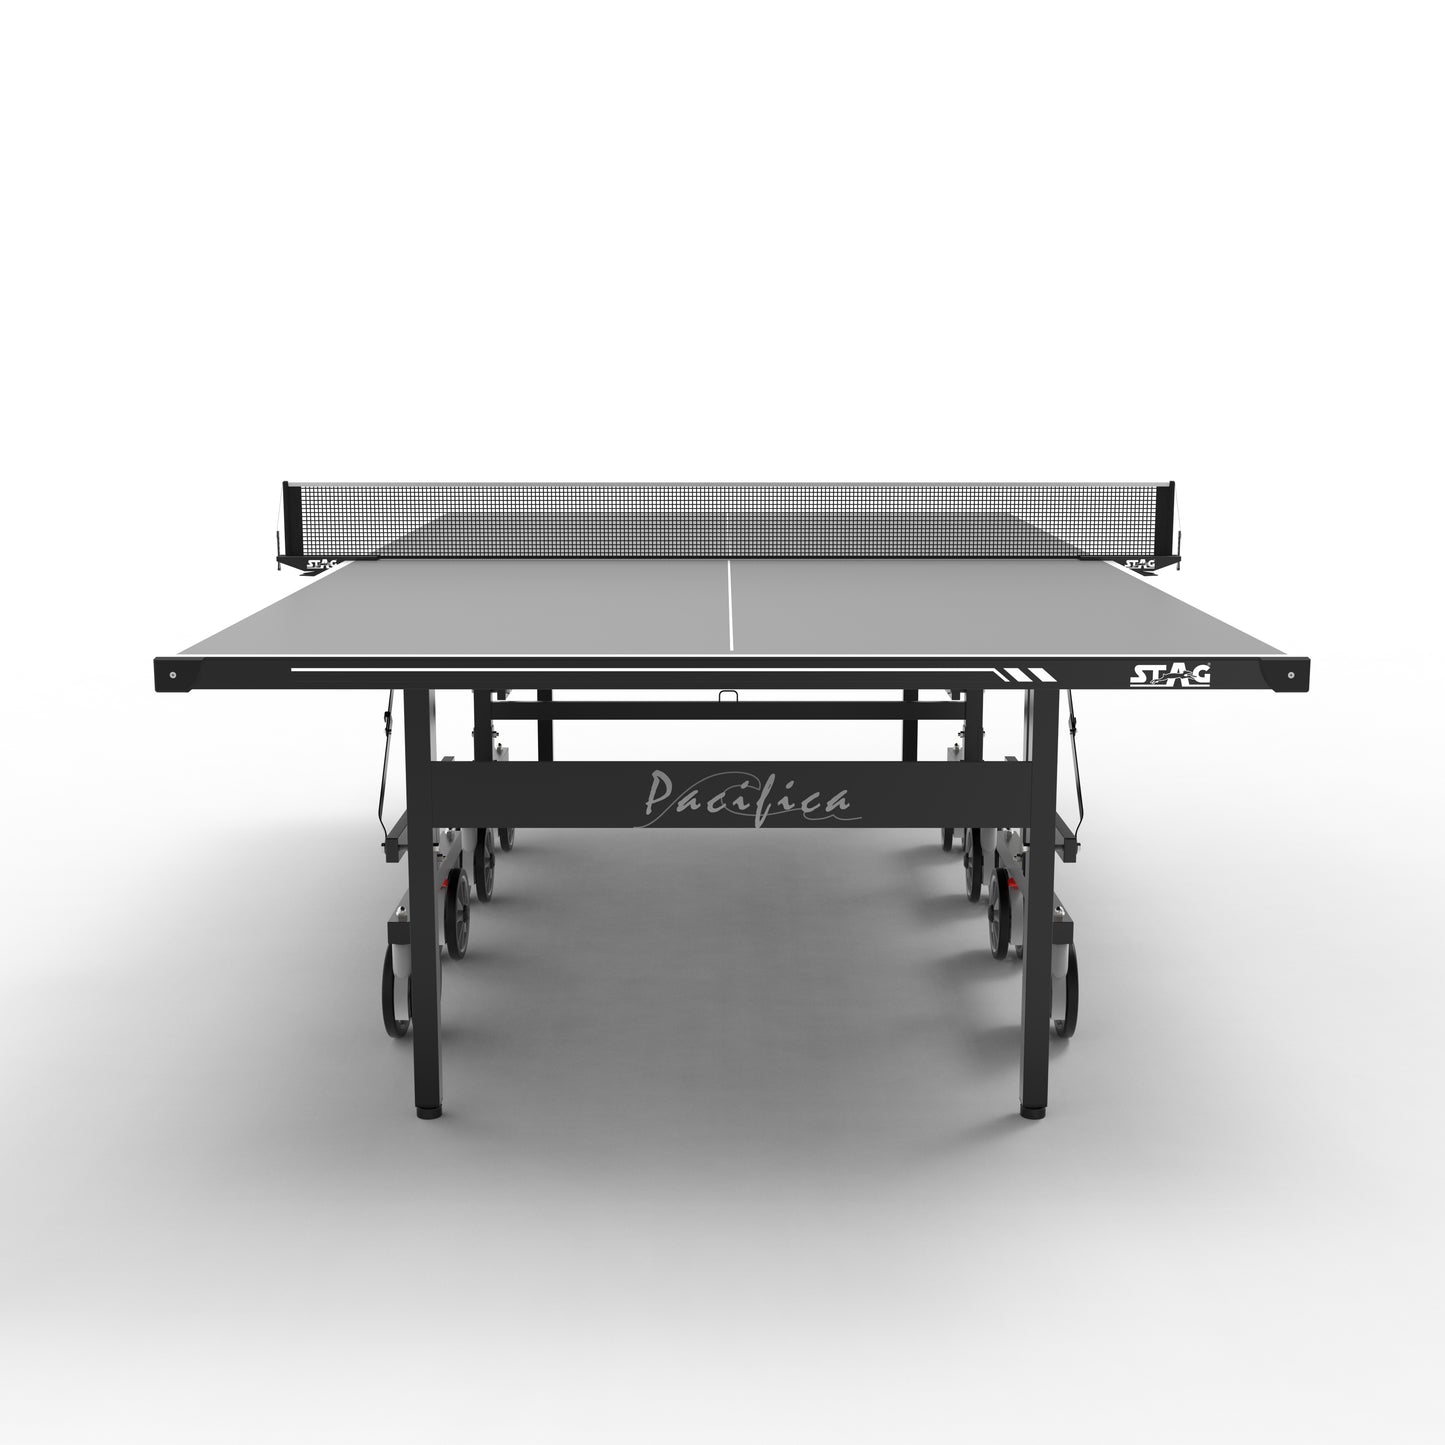 Stag Pacifica Outdoor Table Tennis Table